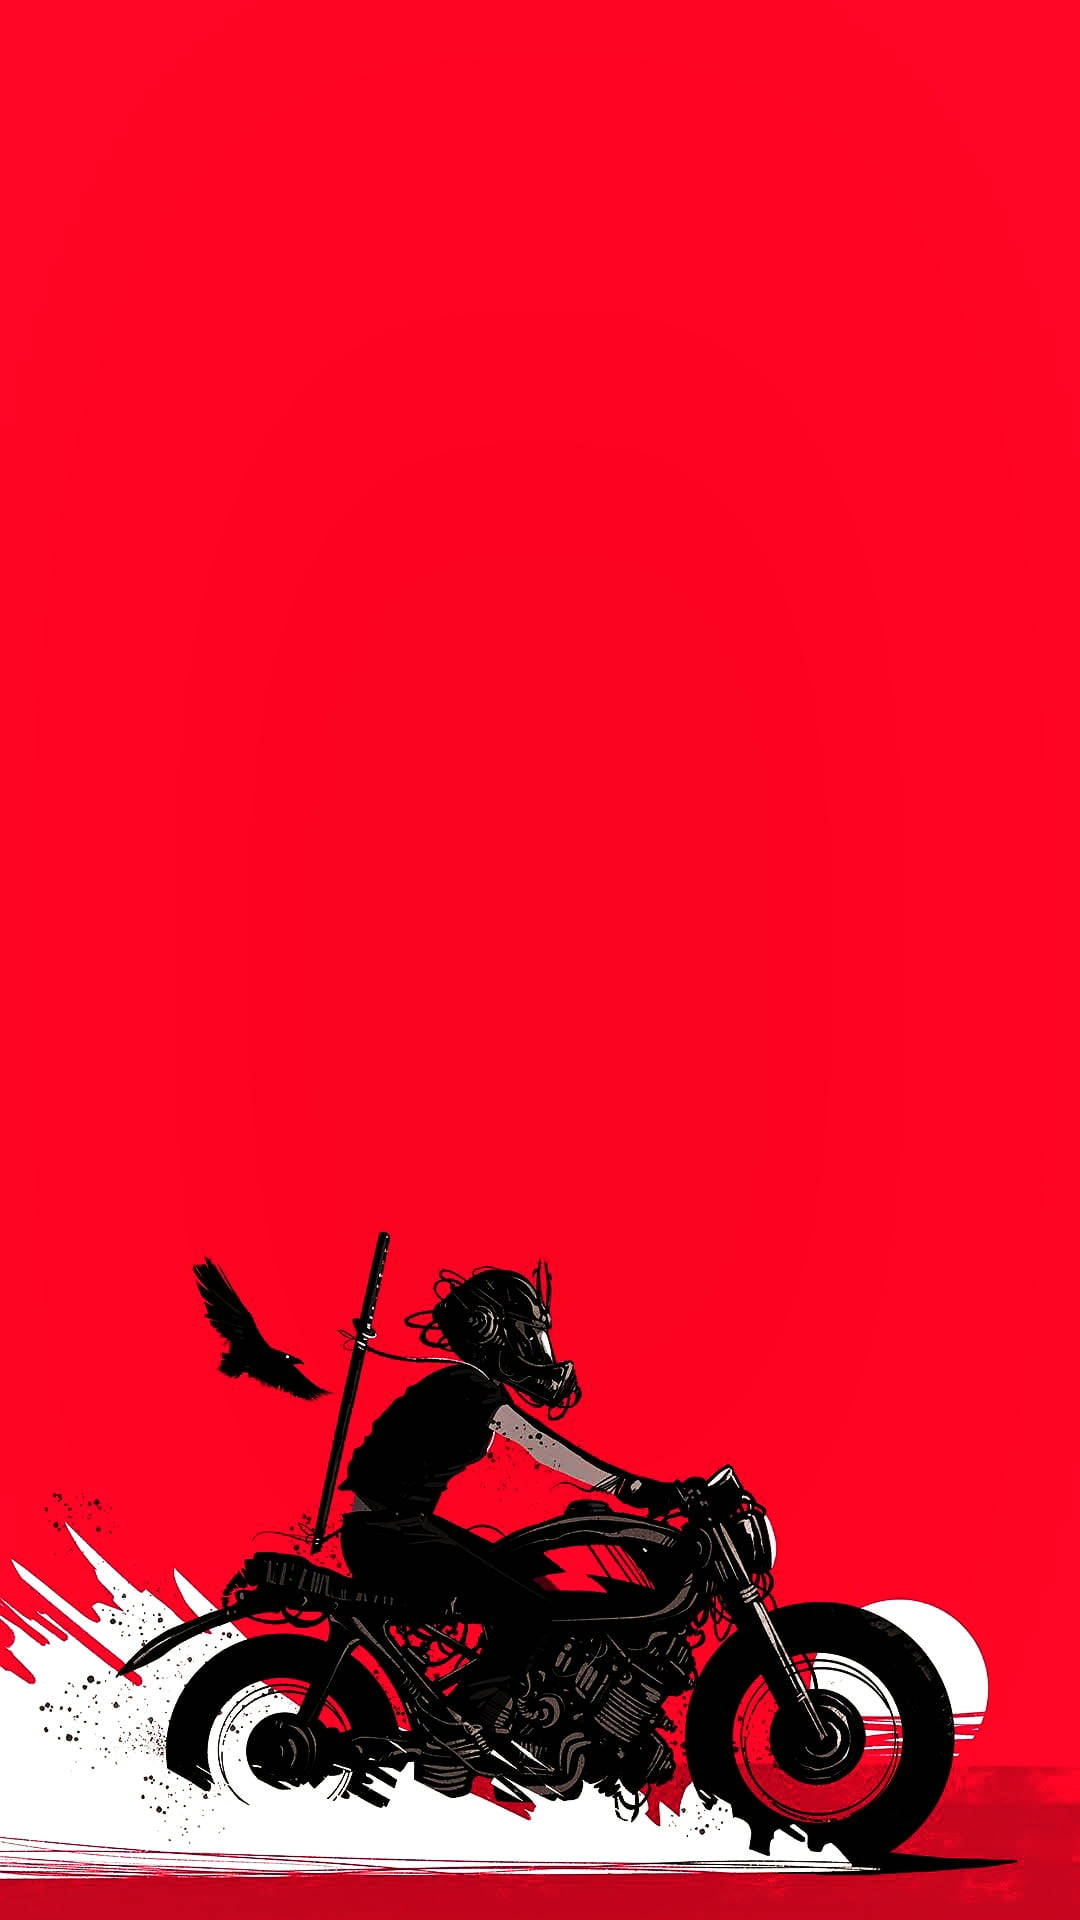 AMOLED Android Red Motorcycle Wallpaper